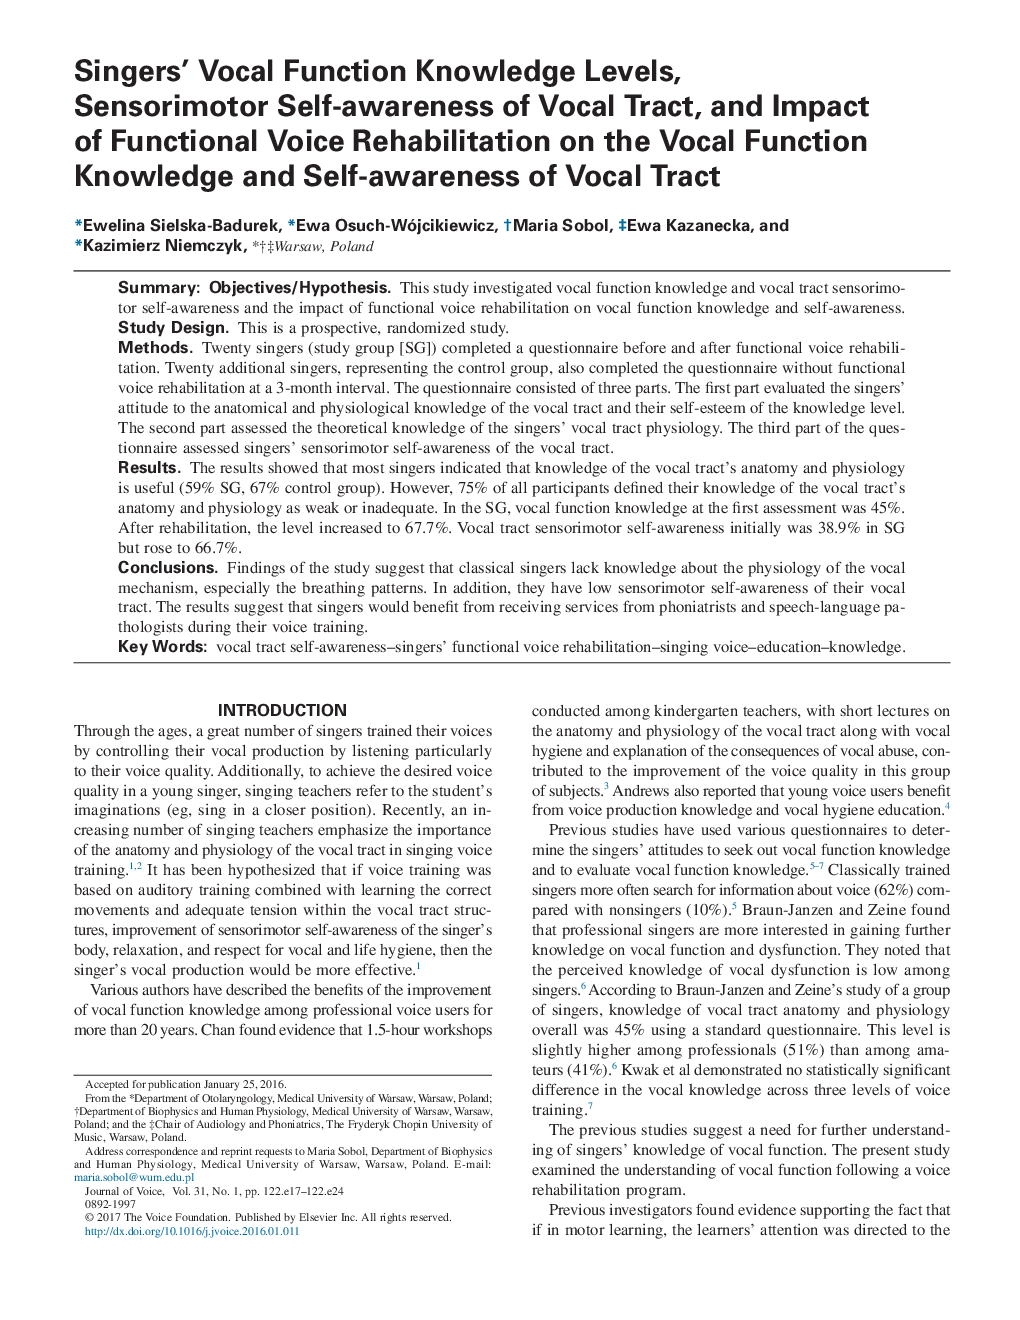 Singers' Vocal Function Knowledge Levels, Sensorimotor Self-awareness of Vocal Tract, and Impact of Functional Voice Rehabilitation on the Vocal Function Knowledge and Self-awareness of Vocal Tract